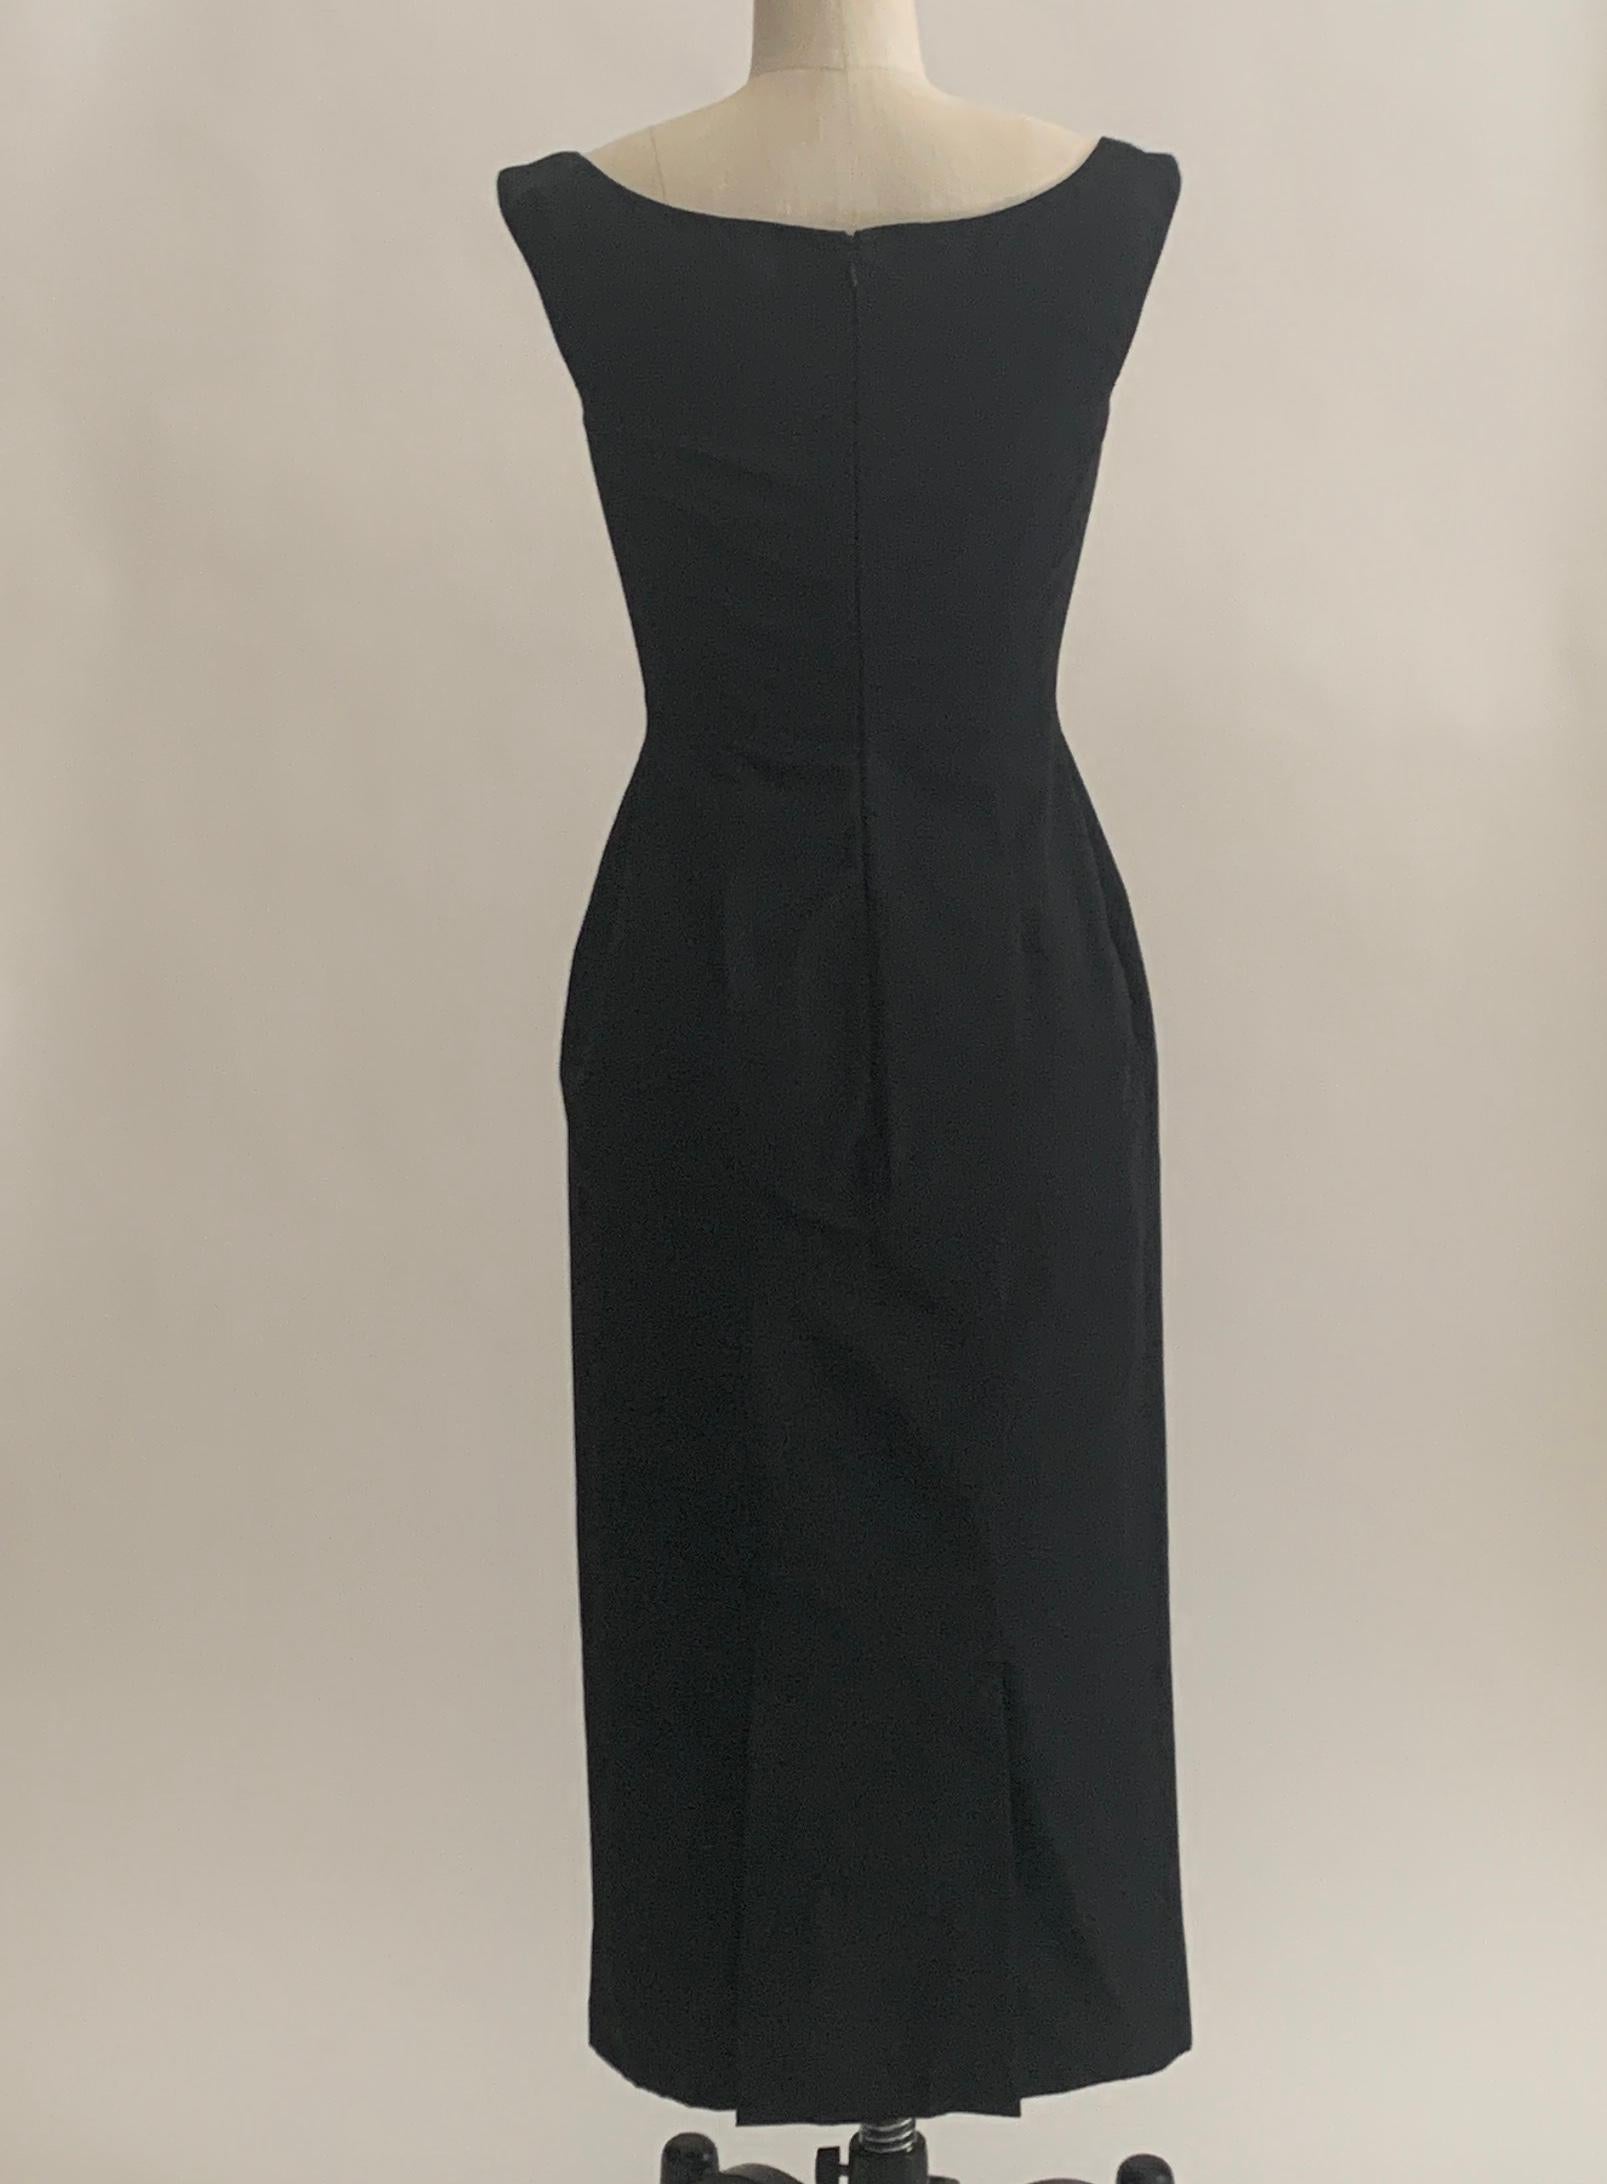 Women's Alexander McQueen 2005 Black Silk Sleeveless Midi Cocktail Dress with Lace Trim For Sale